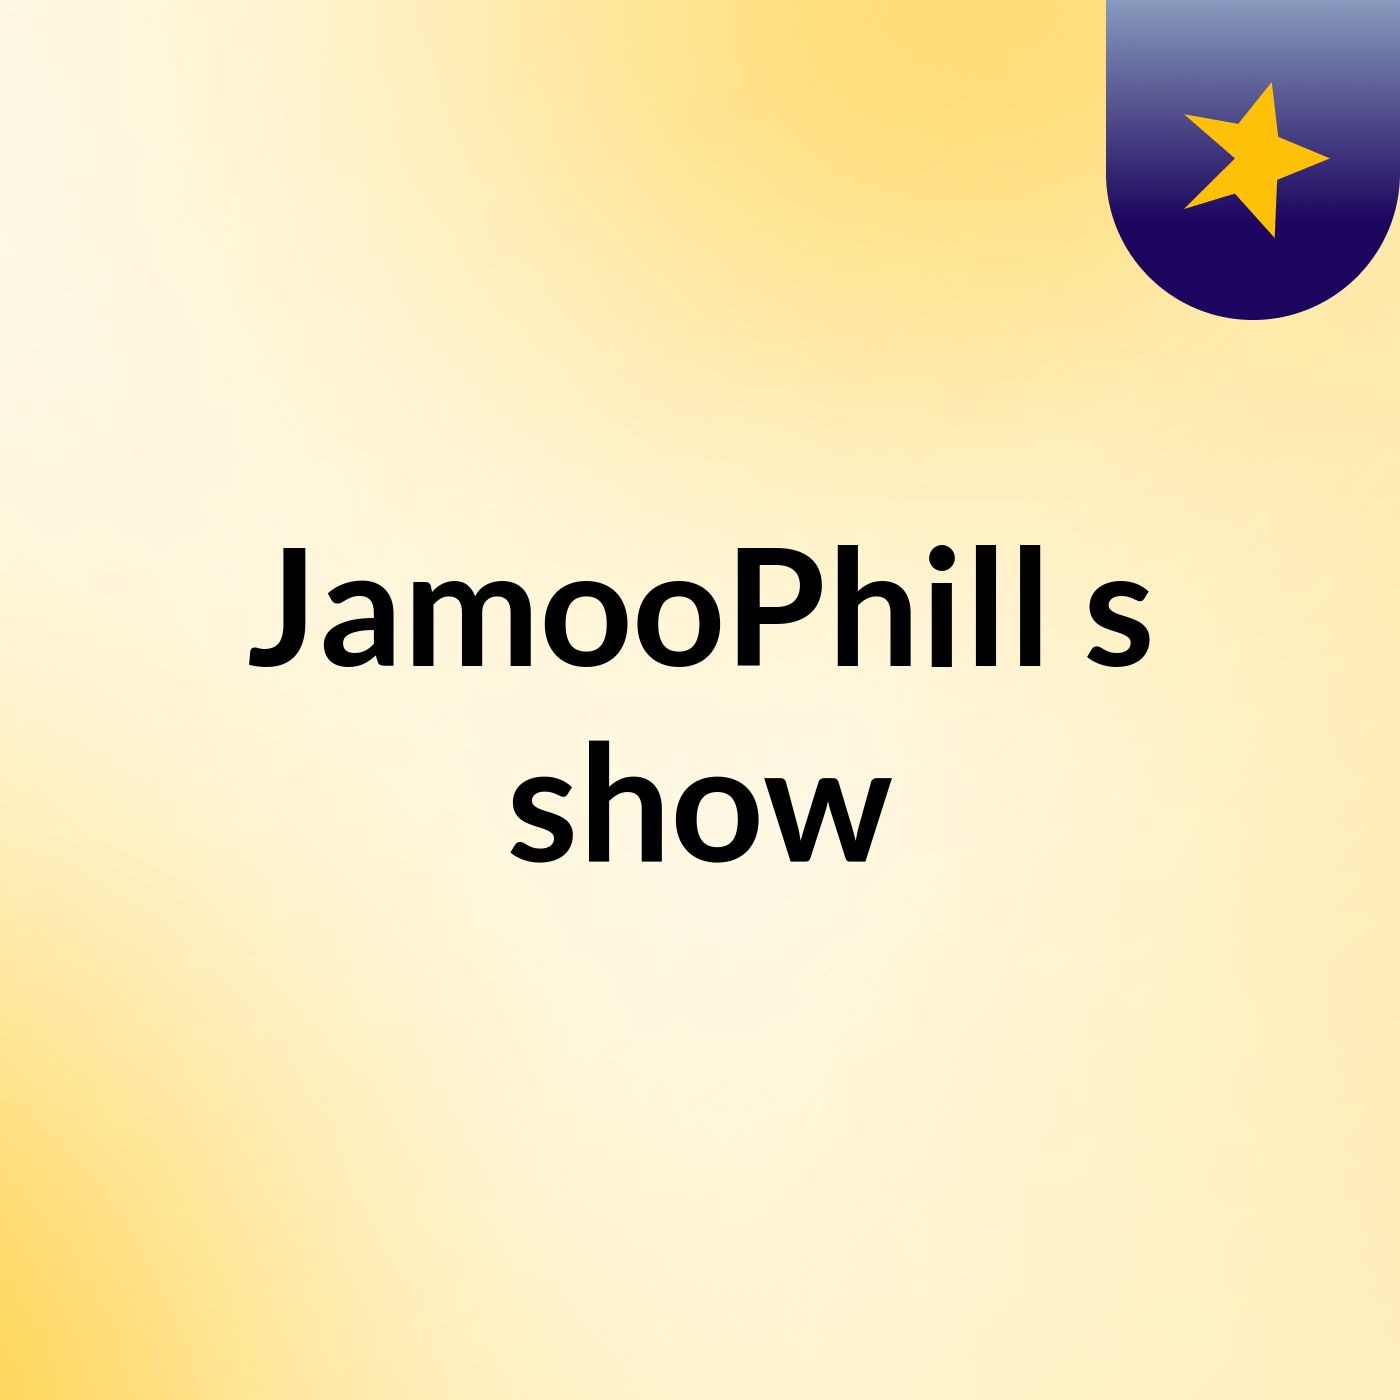 JamooPhill's show